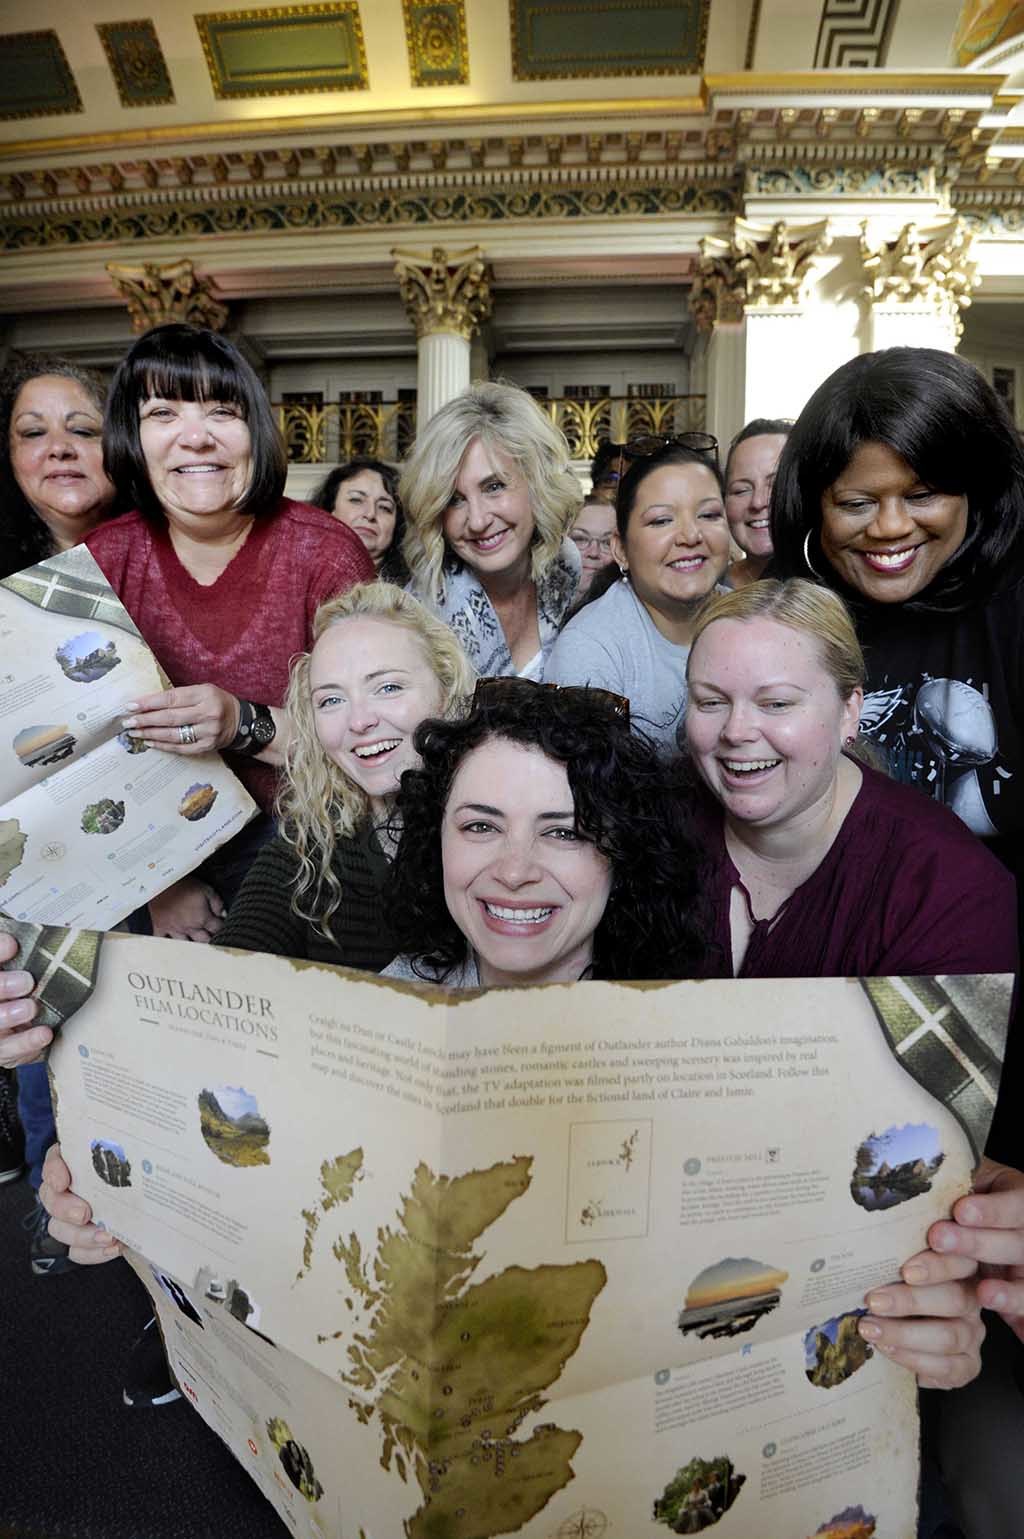 Outlander fans at the Signet Library